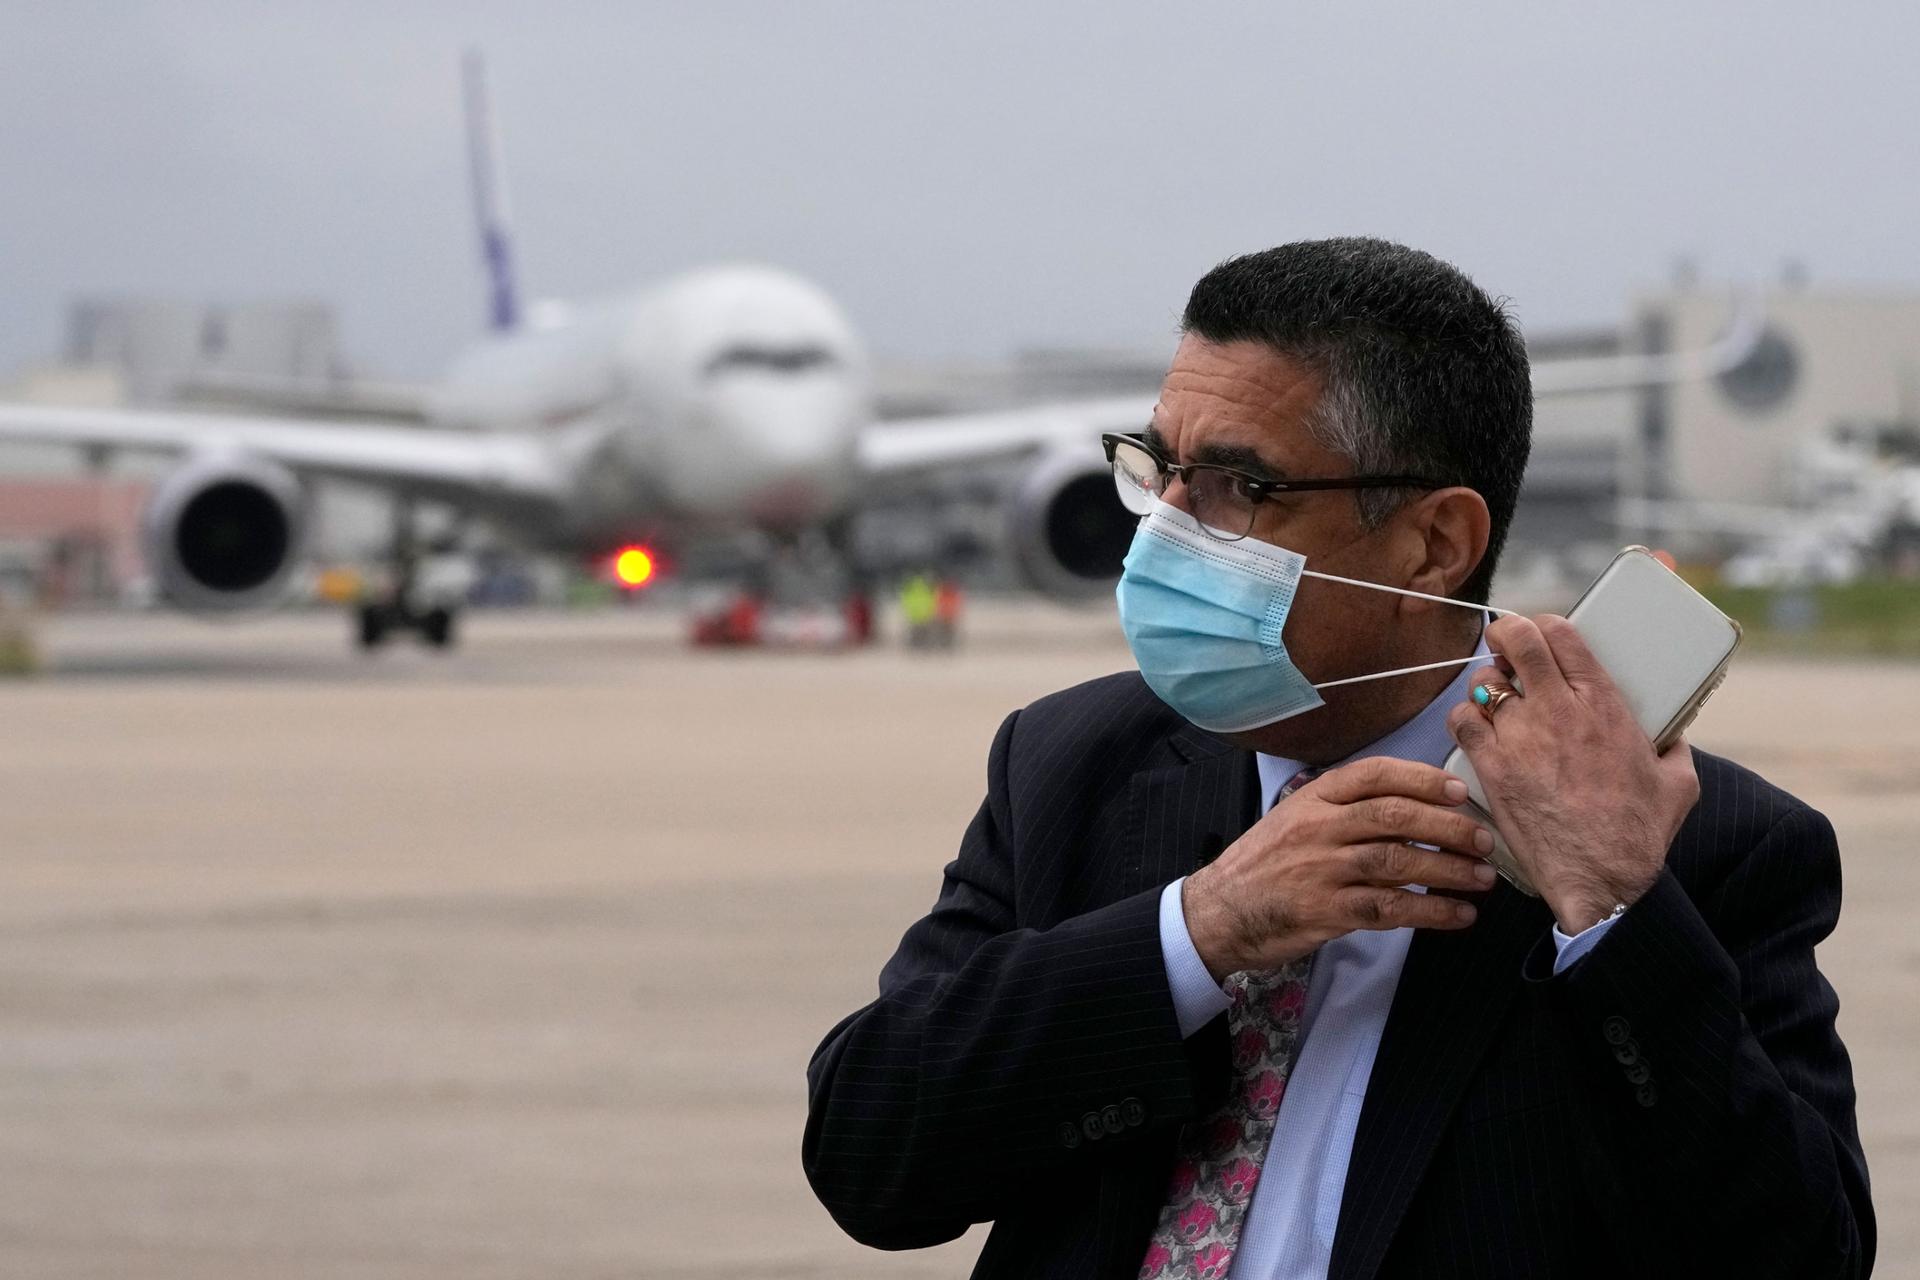 Ahmad Naser Sarmast, founder and director of the Afghanistan National Institute of Music, puts on his face mask as an airplane arrives at Lisbon military airport bringing music students, faculty members and their families from Afghanistan, Monday, Dec. 13